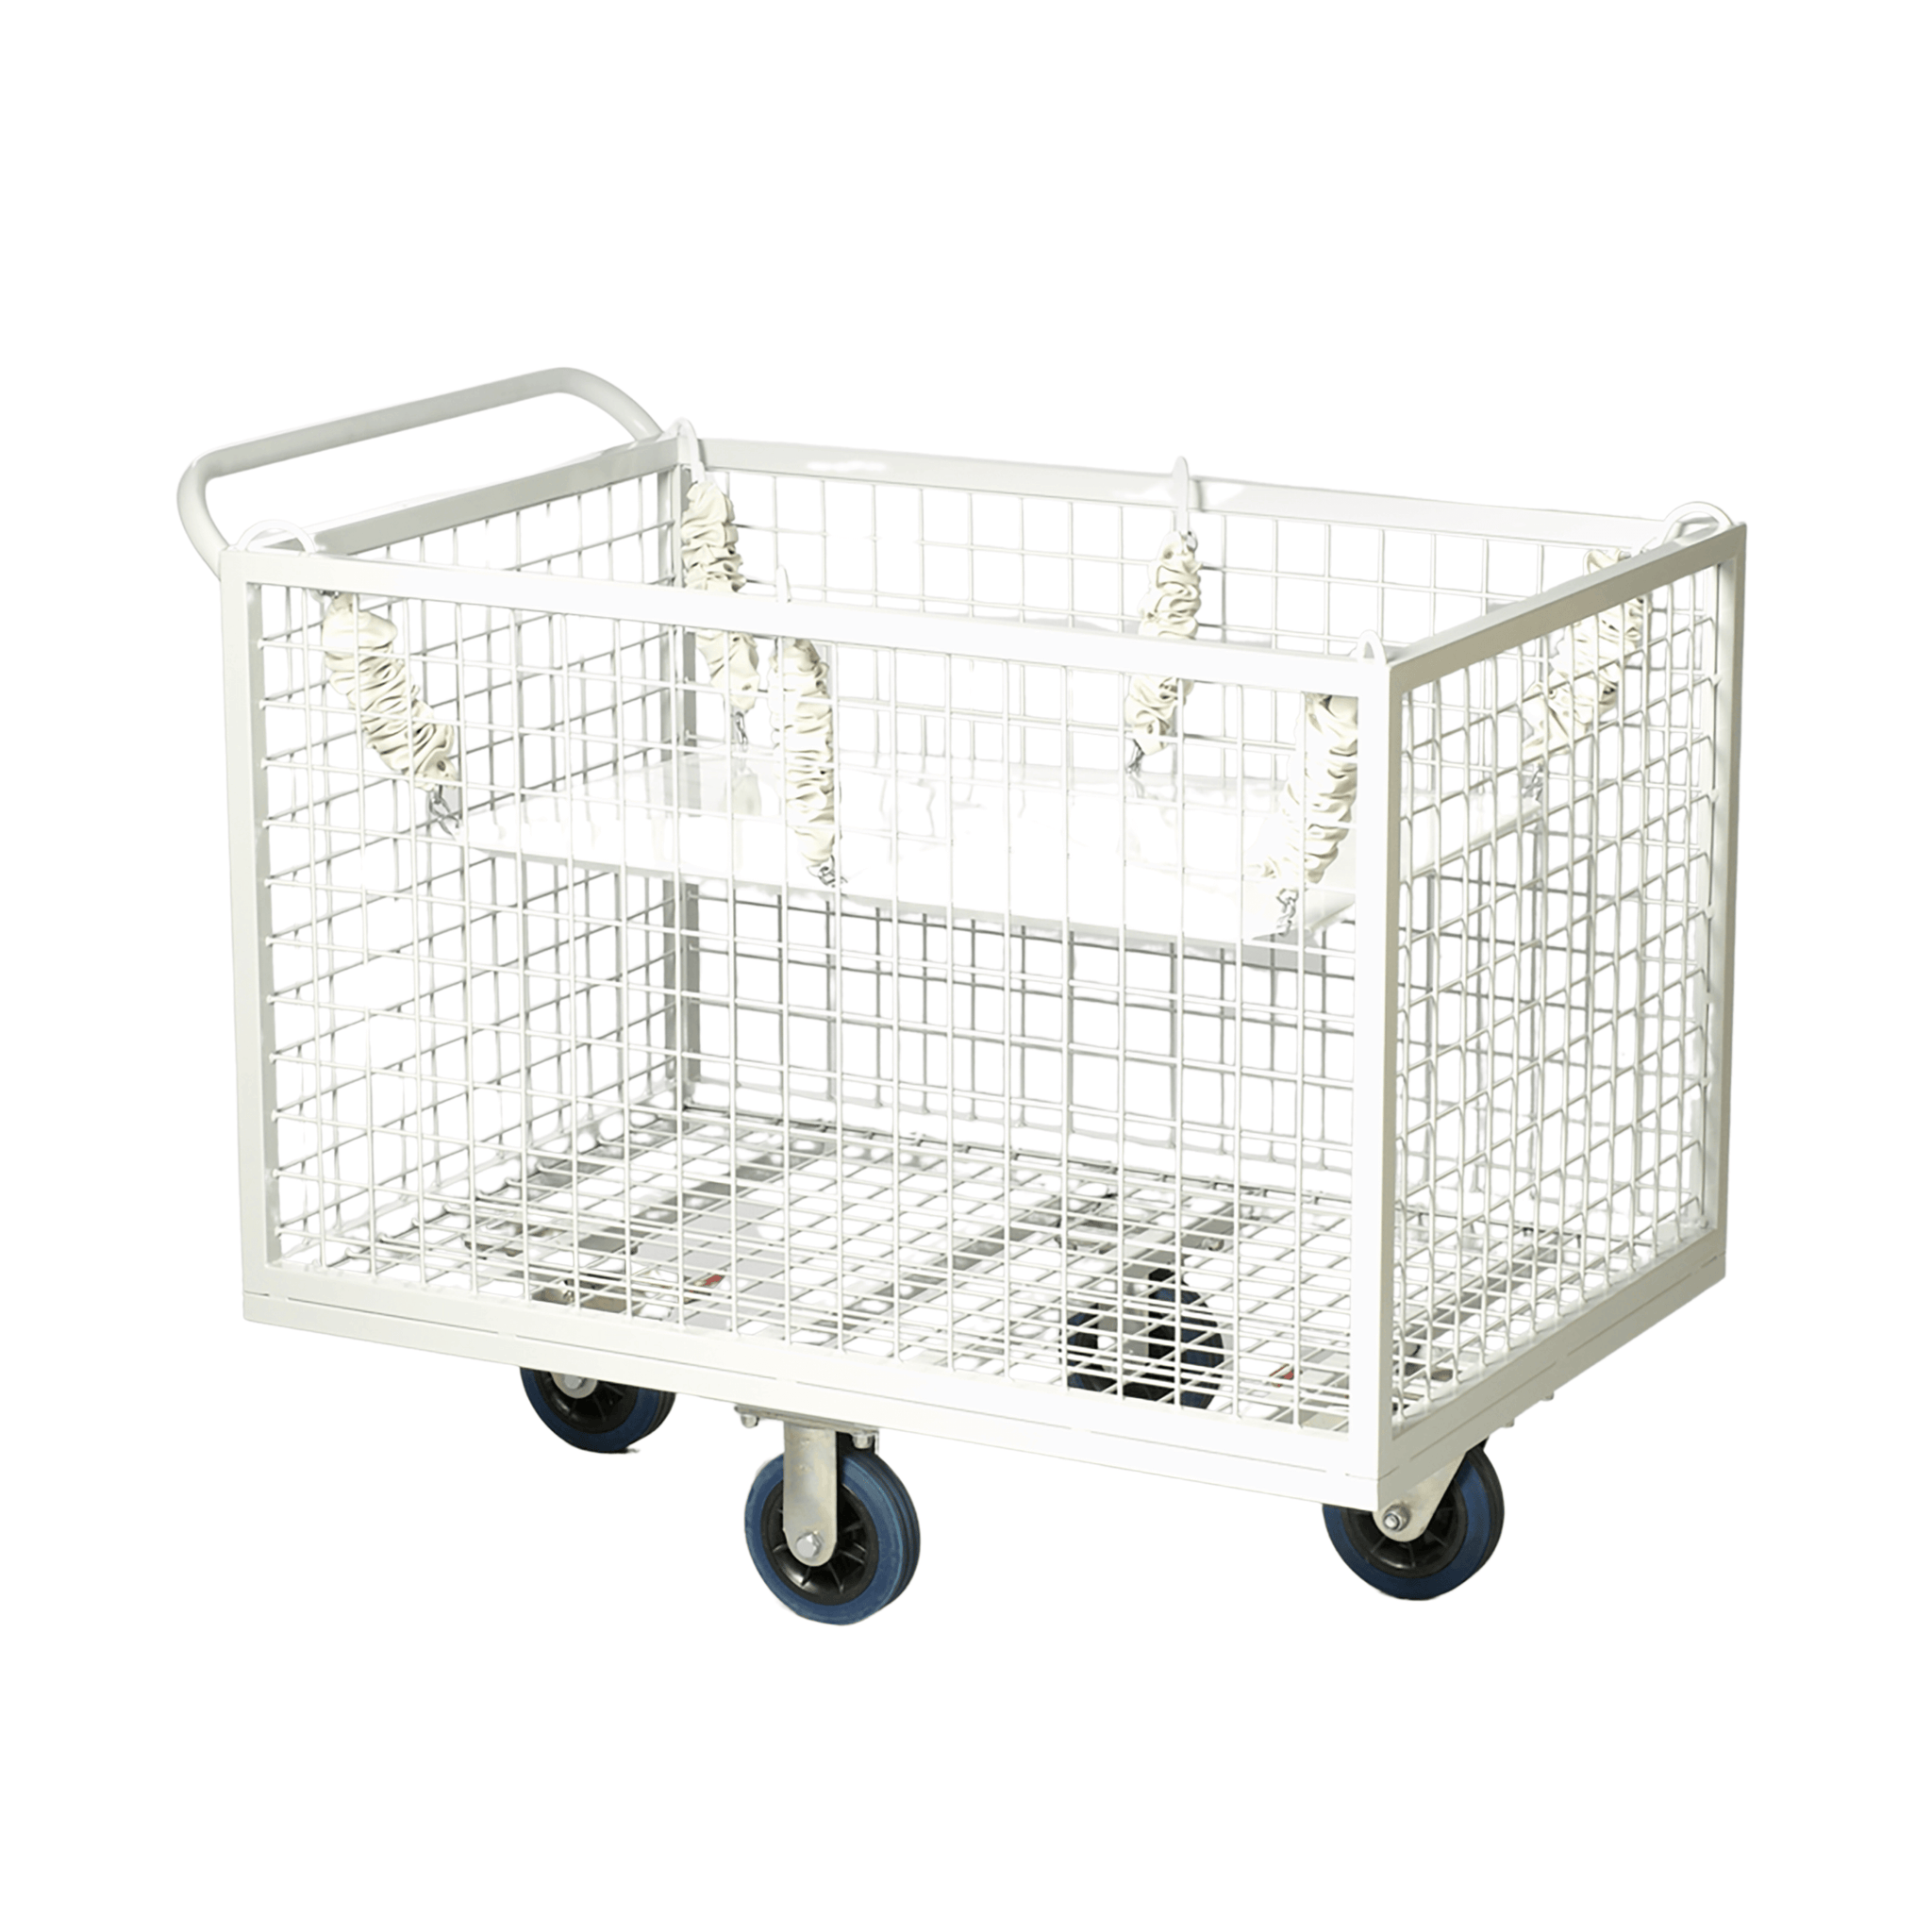 Wet & Dry Laundry Trolley - Spring Loaded Base